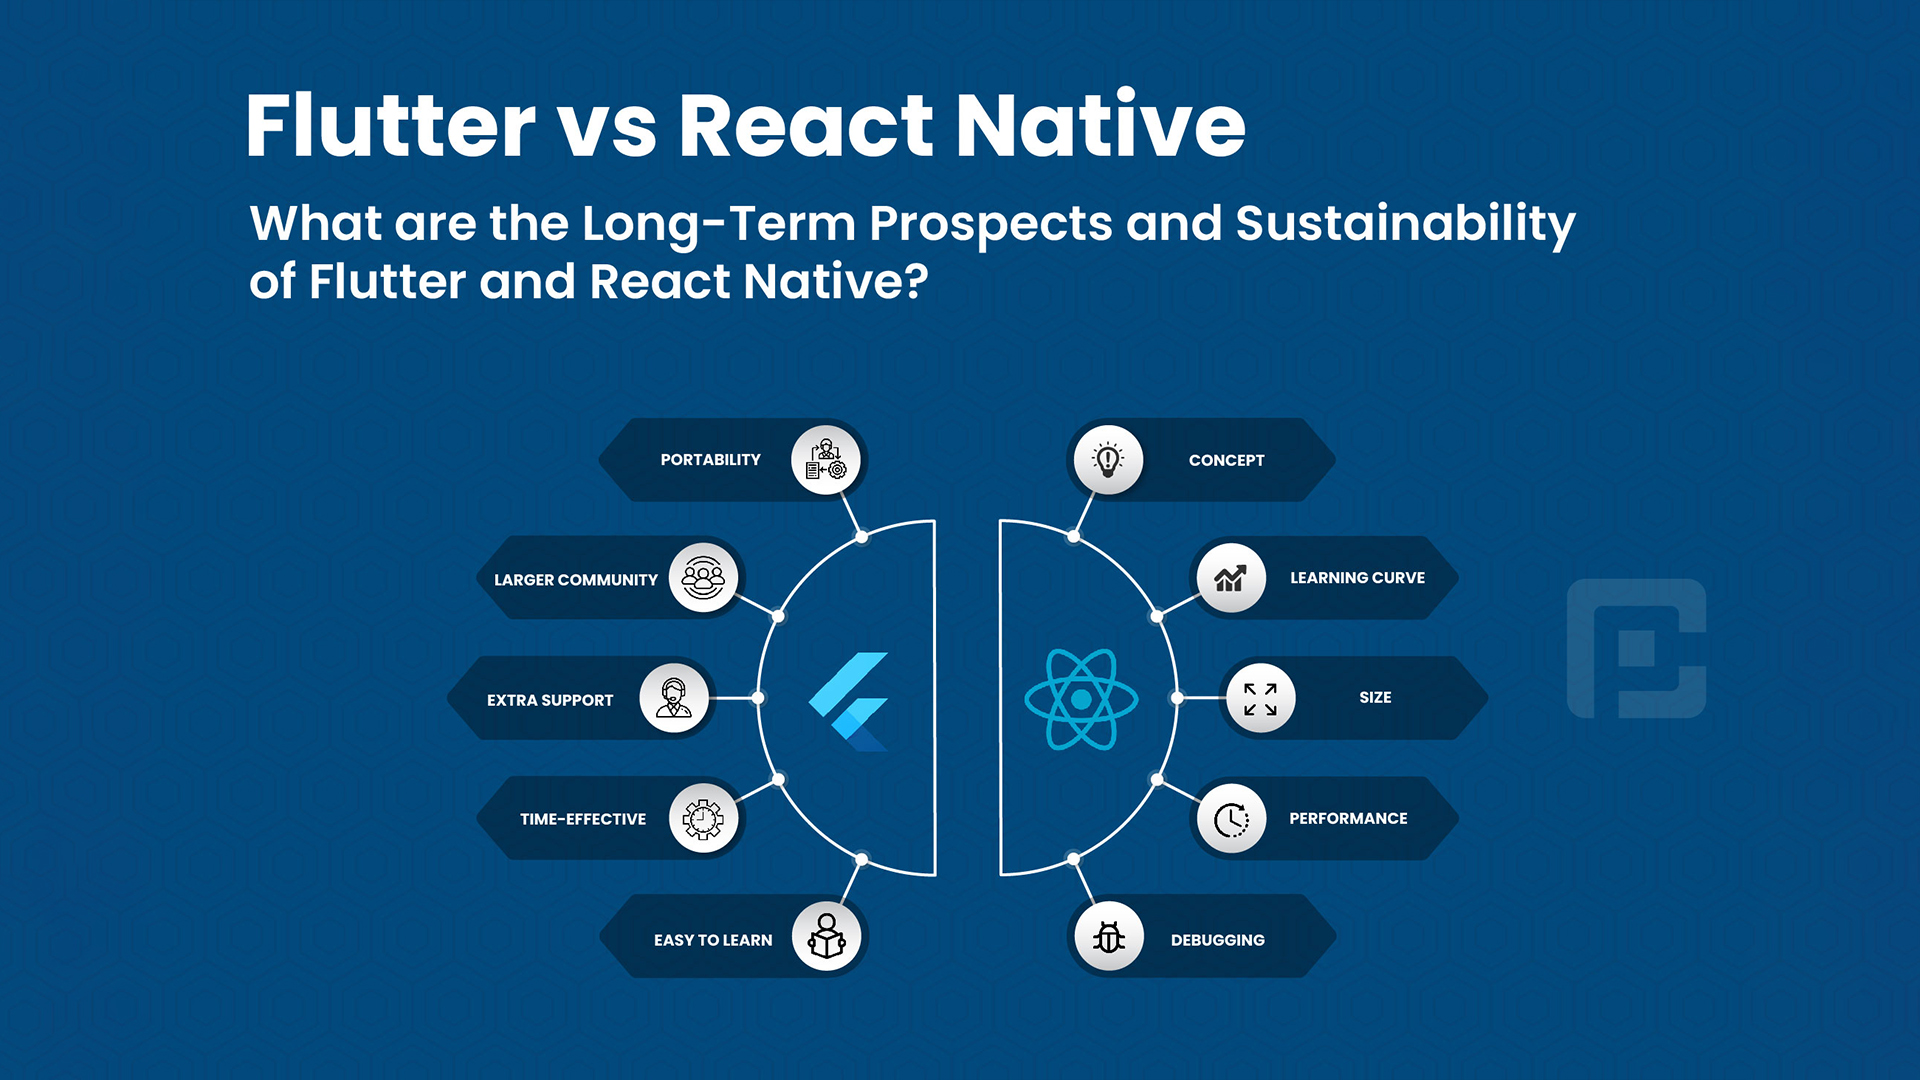 Long-Term Prospects and Sustainability: Flutter vs. React Native